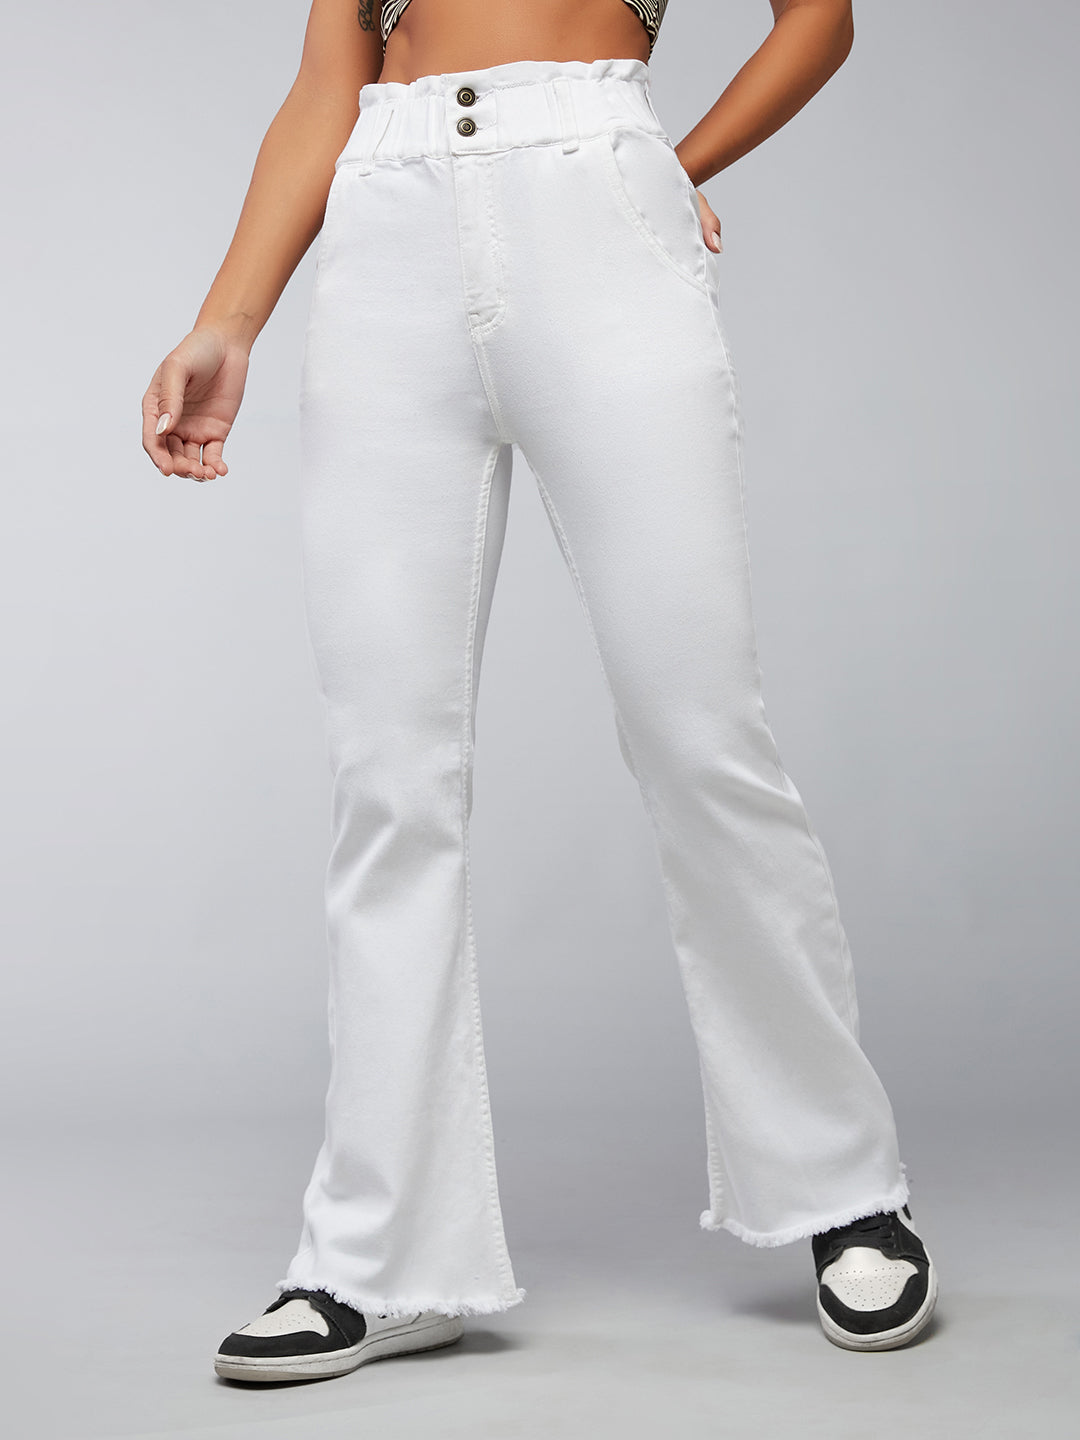 Women's White Flared High Rise Clean Look Ankle length Stretchable Denim Jeans